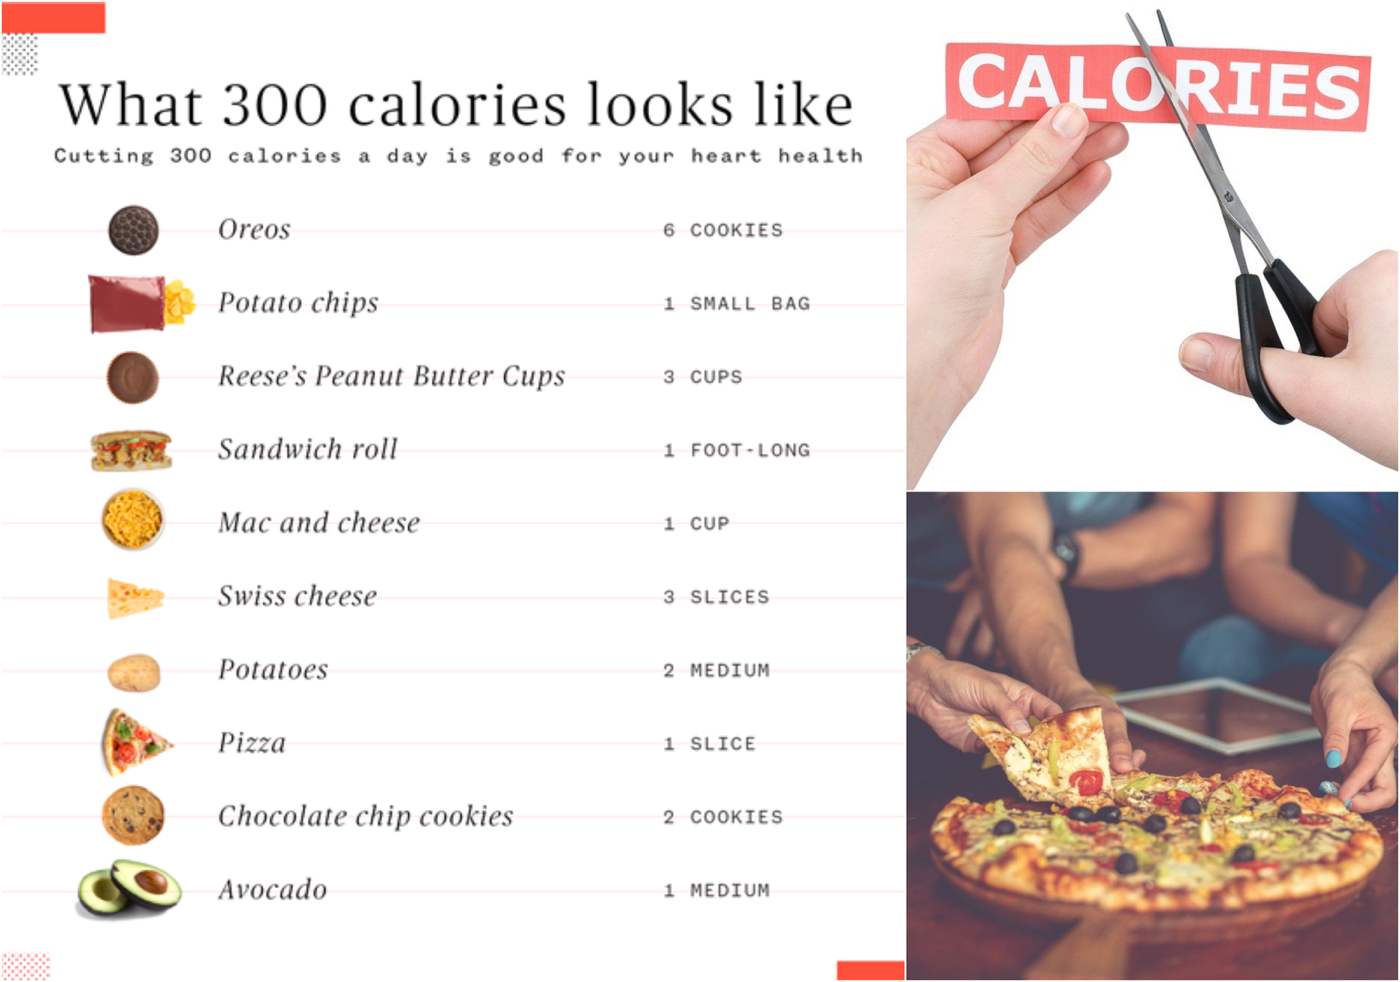 Calorie-adjusted nutrition is said to produce 300 calories